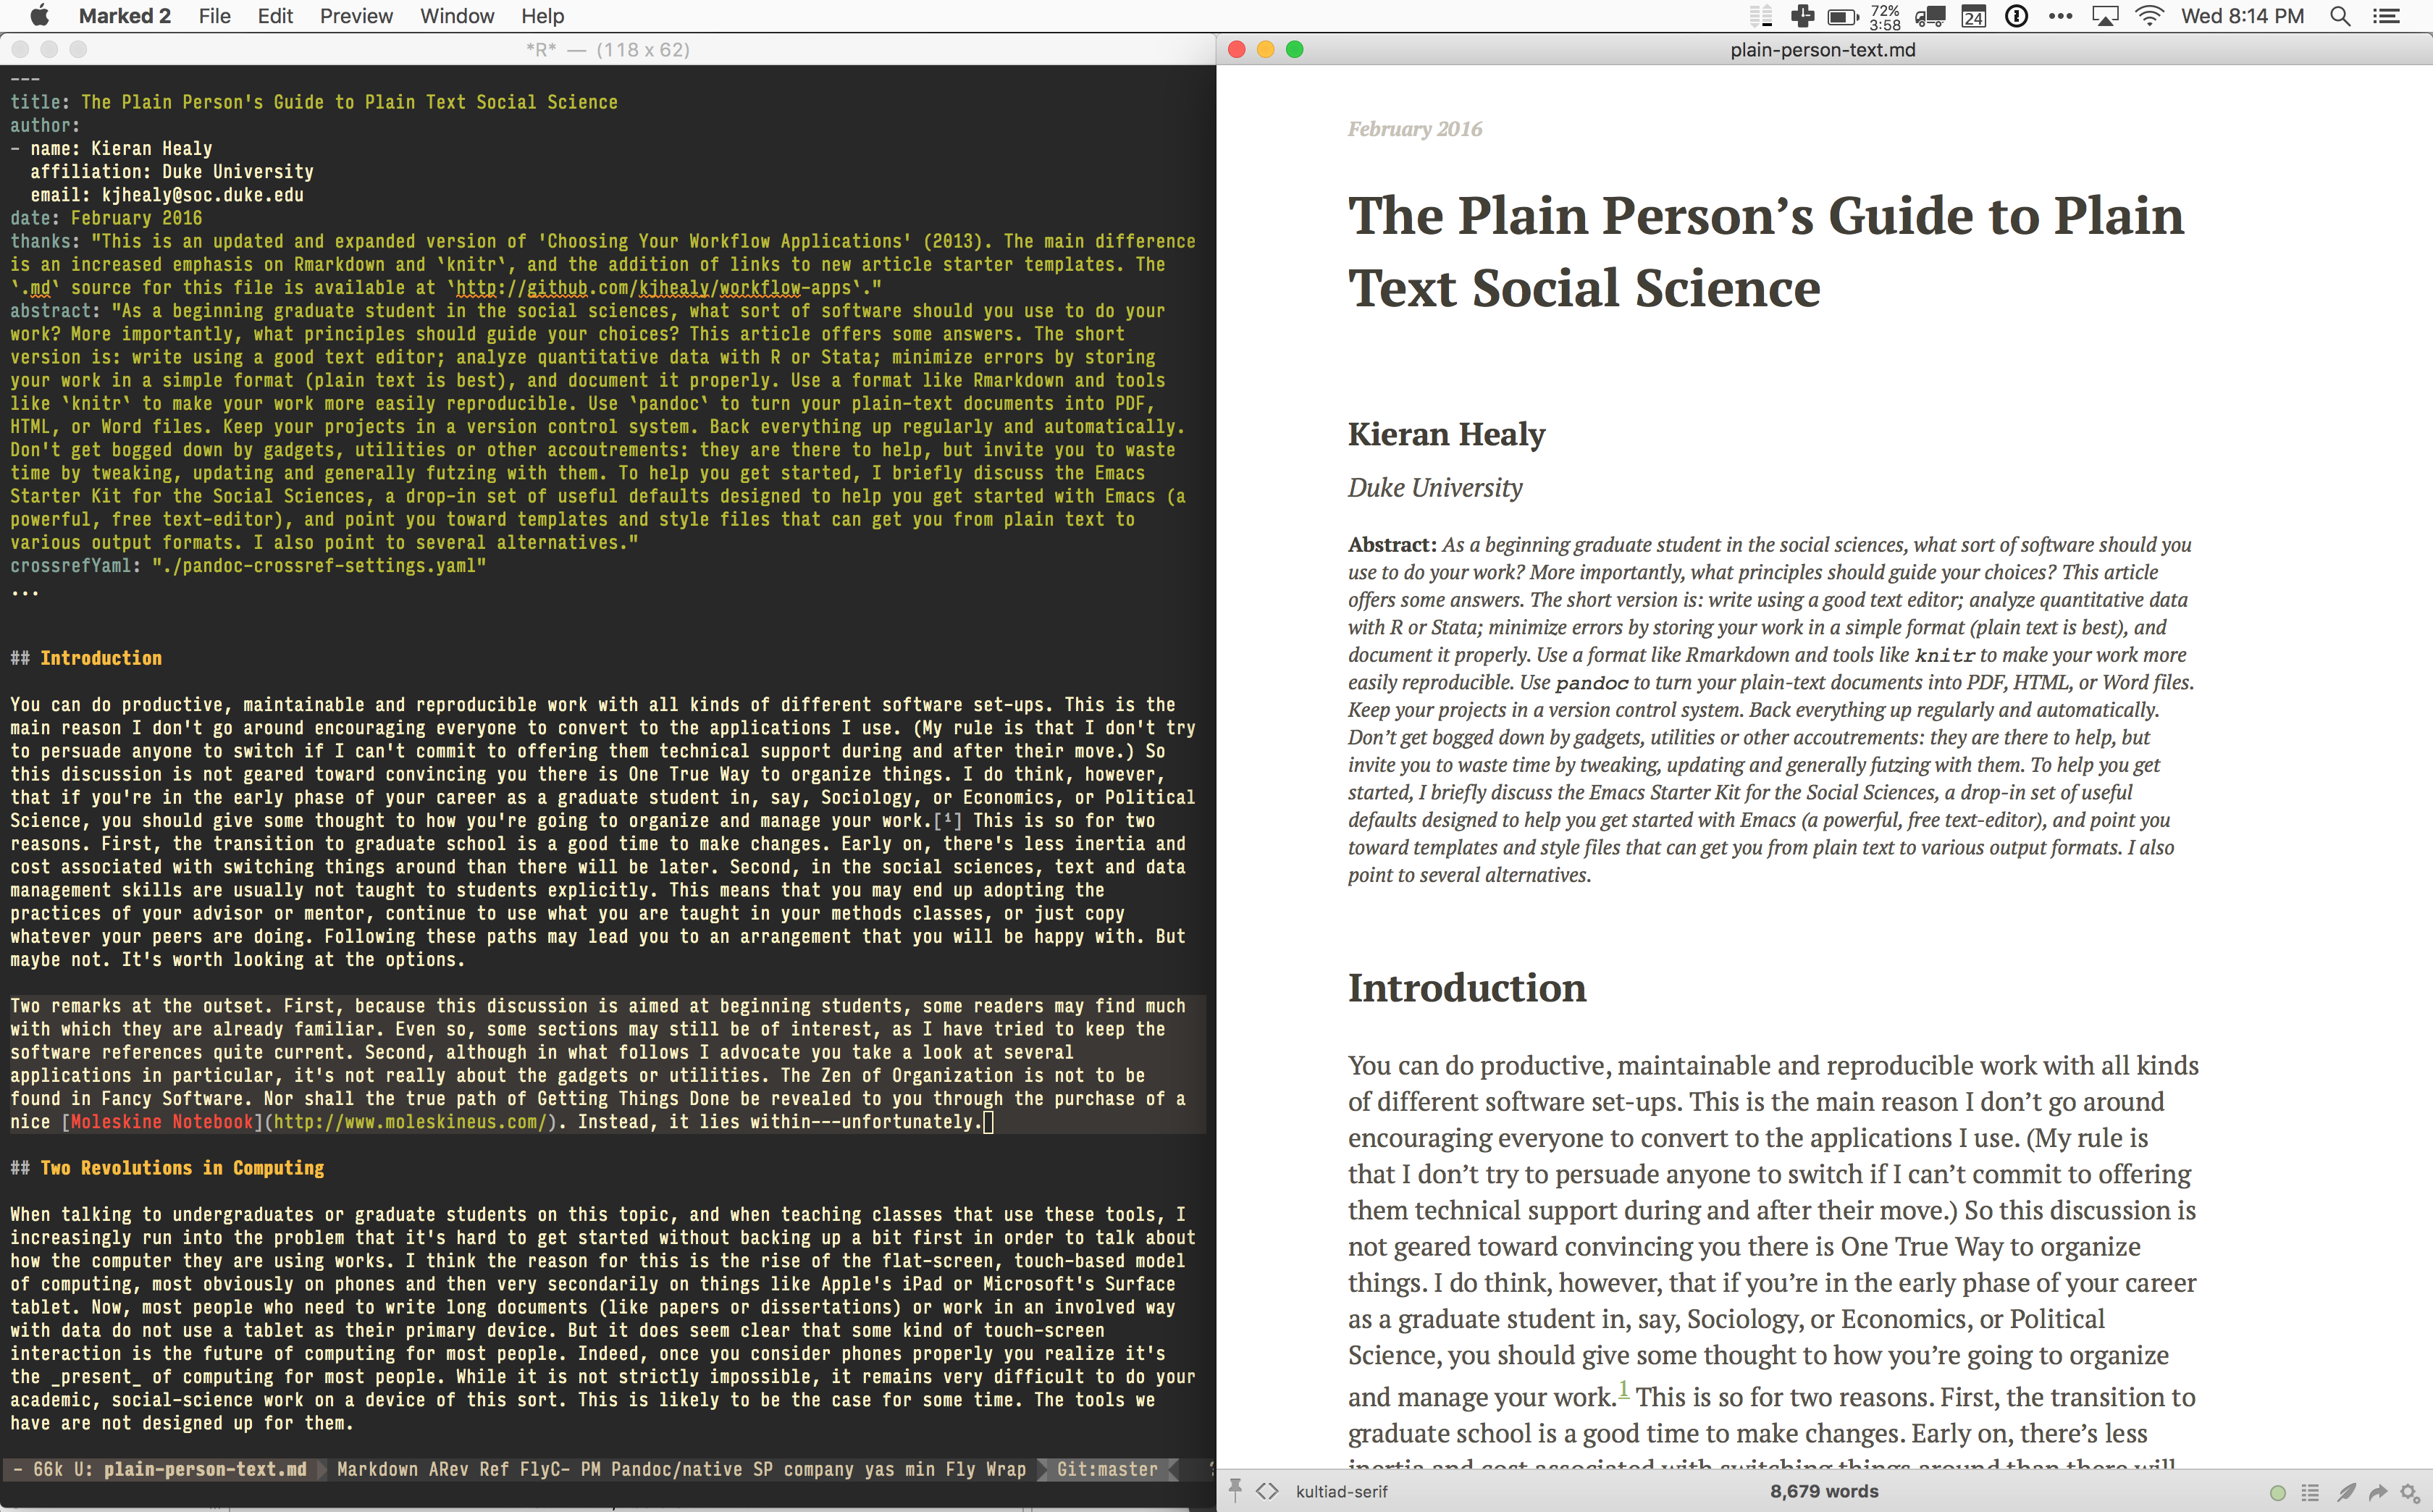 Working on this document in Emacs (left), with a live HTML version displayed in Marked (right).